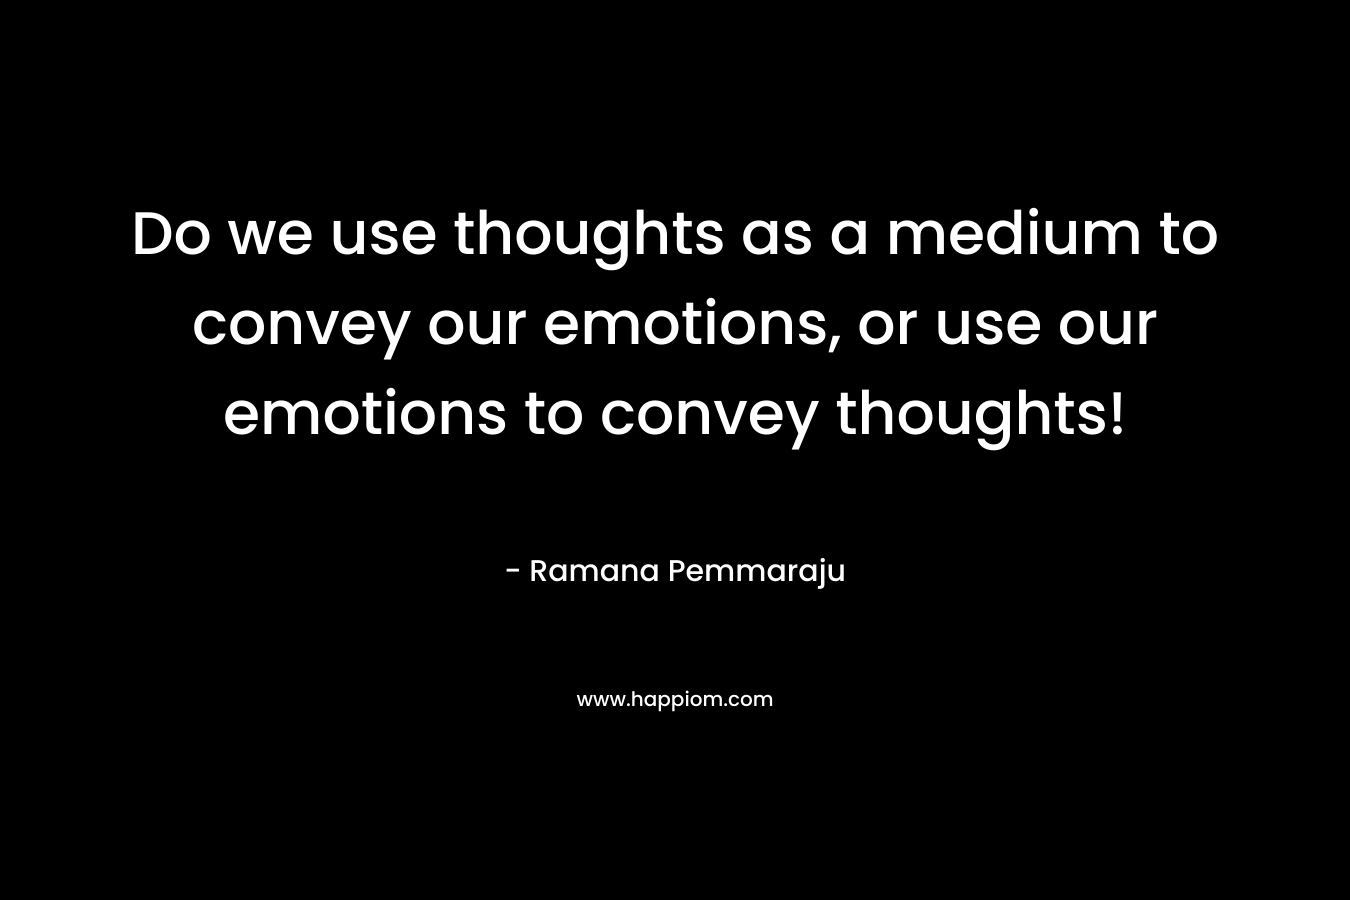 Do we use thoughts as a medium to convey our emotions, or use our emotions to convey thoughts!